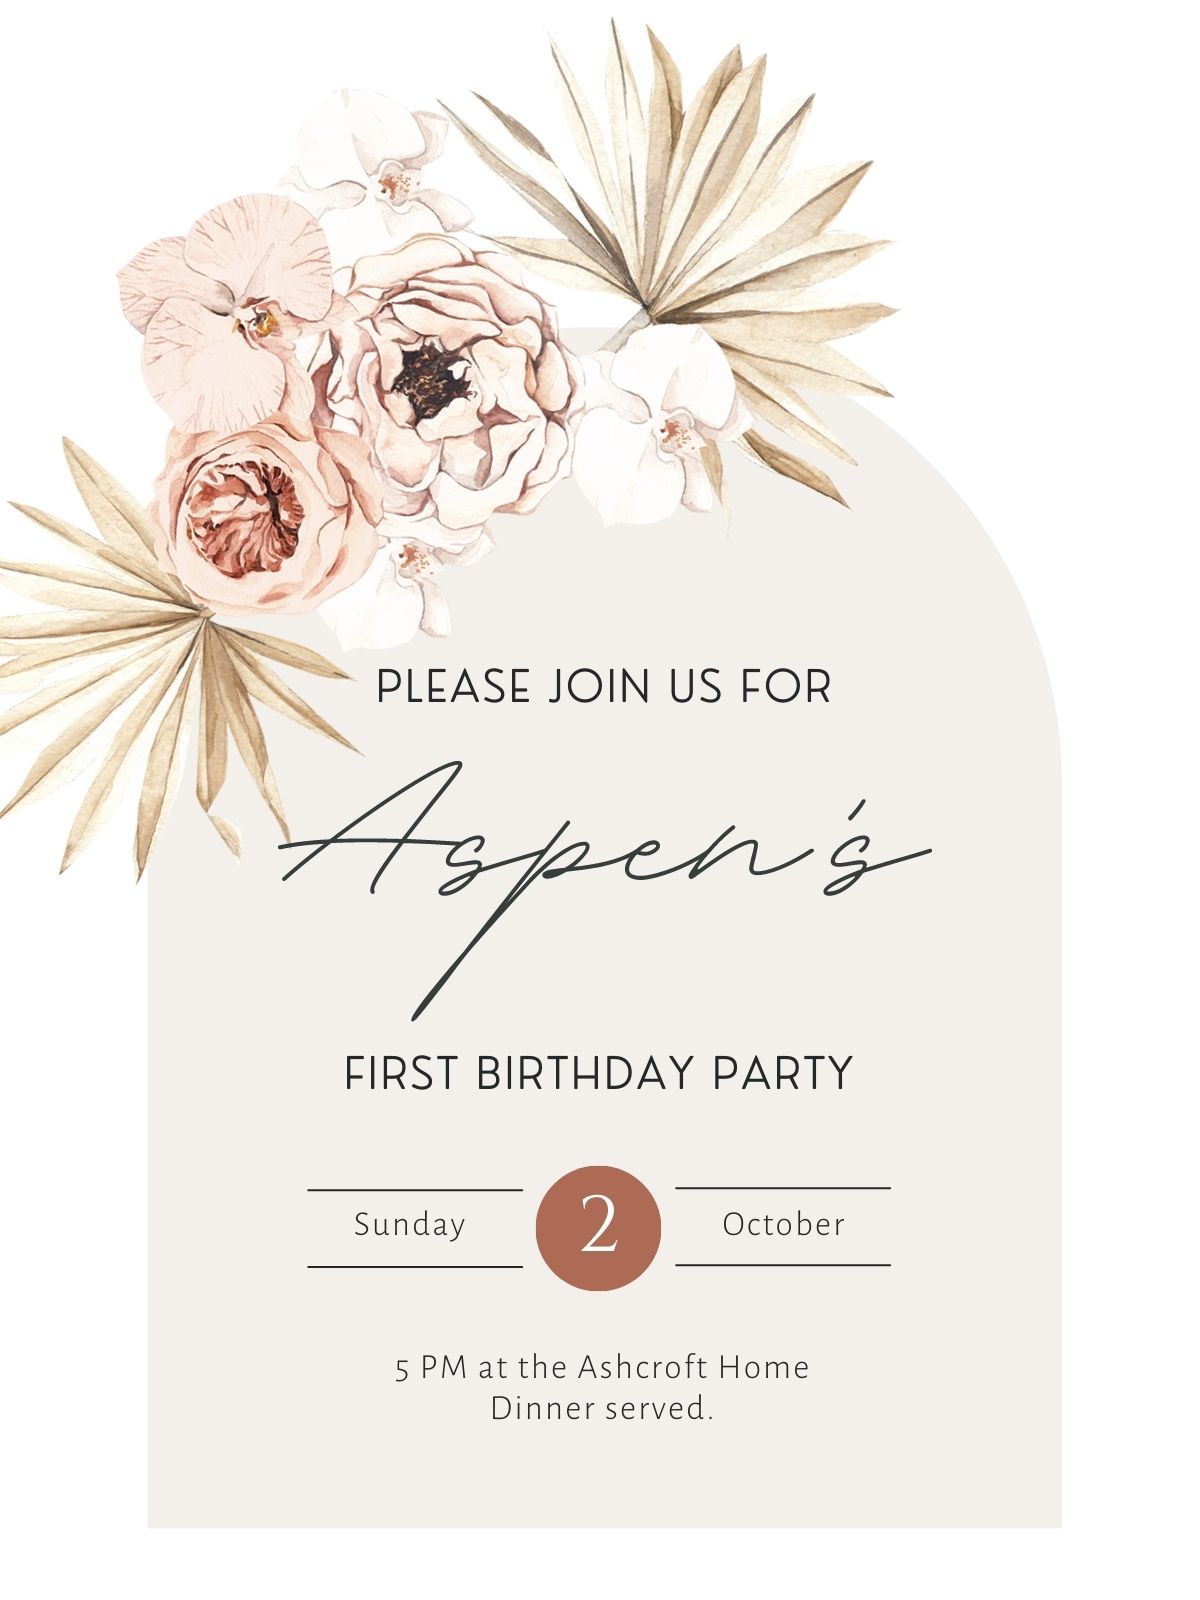 Boho rainbow birthday invitation with flowers and palm leaves.